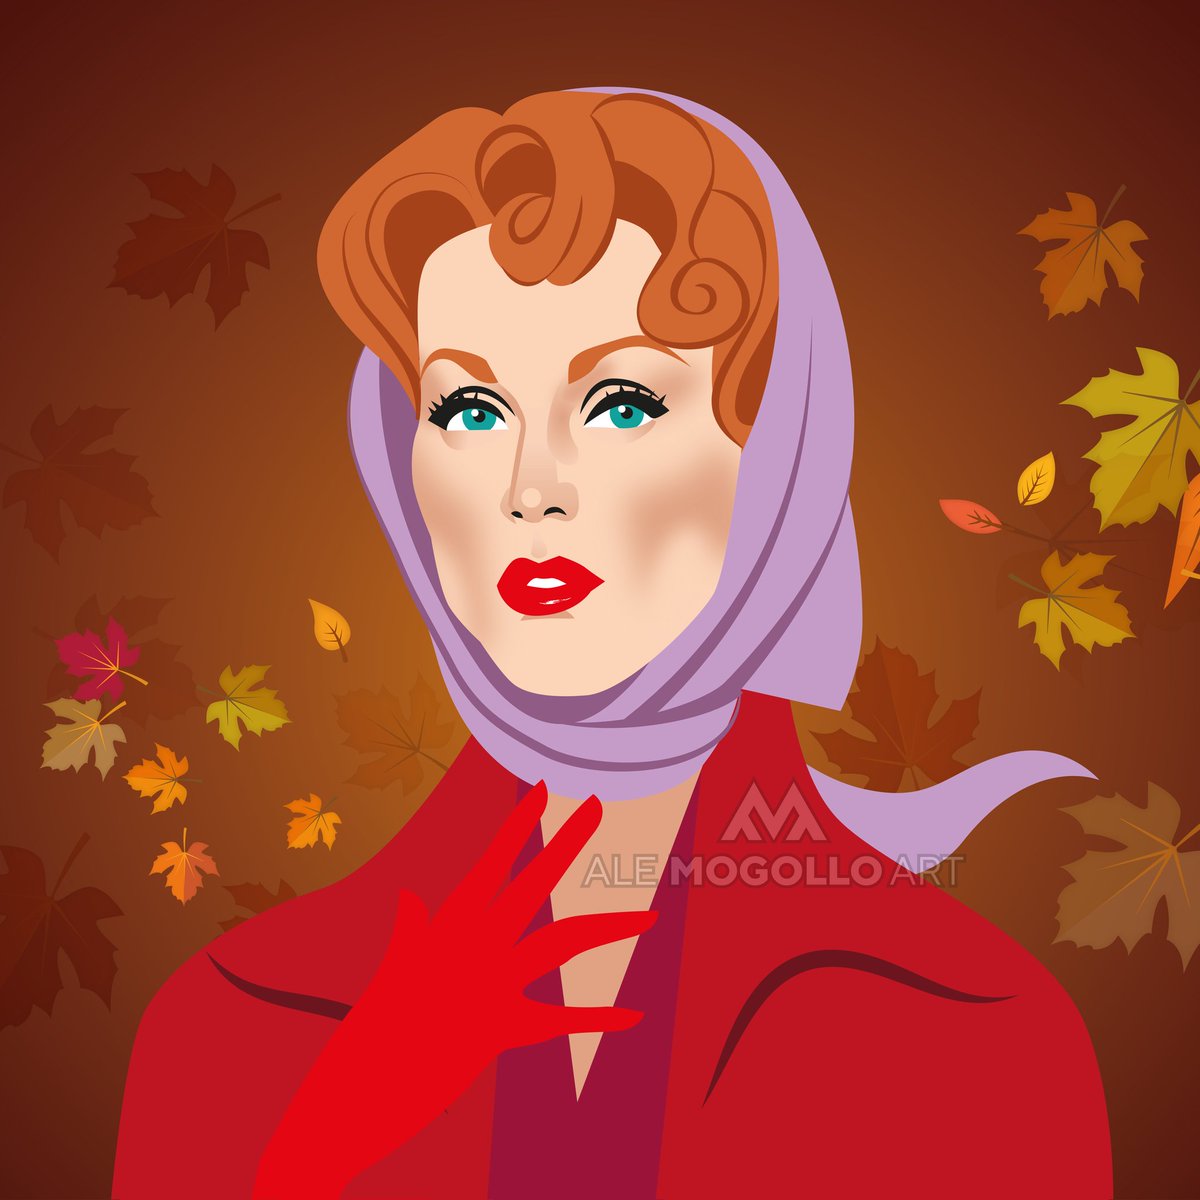 Happy birthday to film director, screenwriter and producer Todd Haynes who is 62 today. His 2002 film Far from Heaven, starring a wonderful Julianne Moore, and inspired by the work of Douglas Sirk, is one of my favourites from the 00's.
#toddhaynes #juliannemoore #farfromheaven